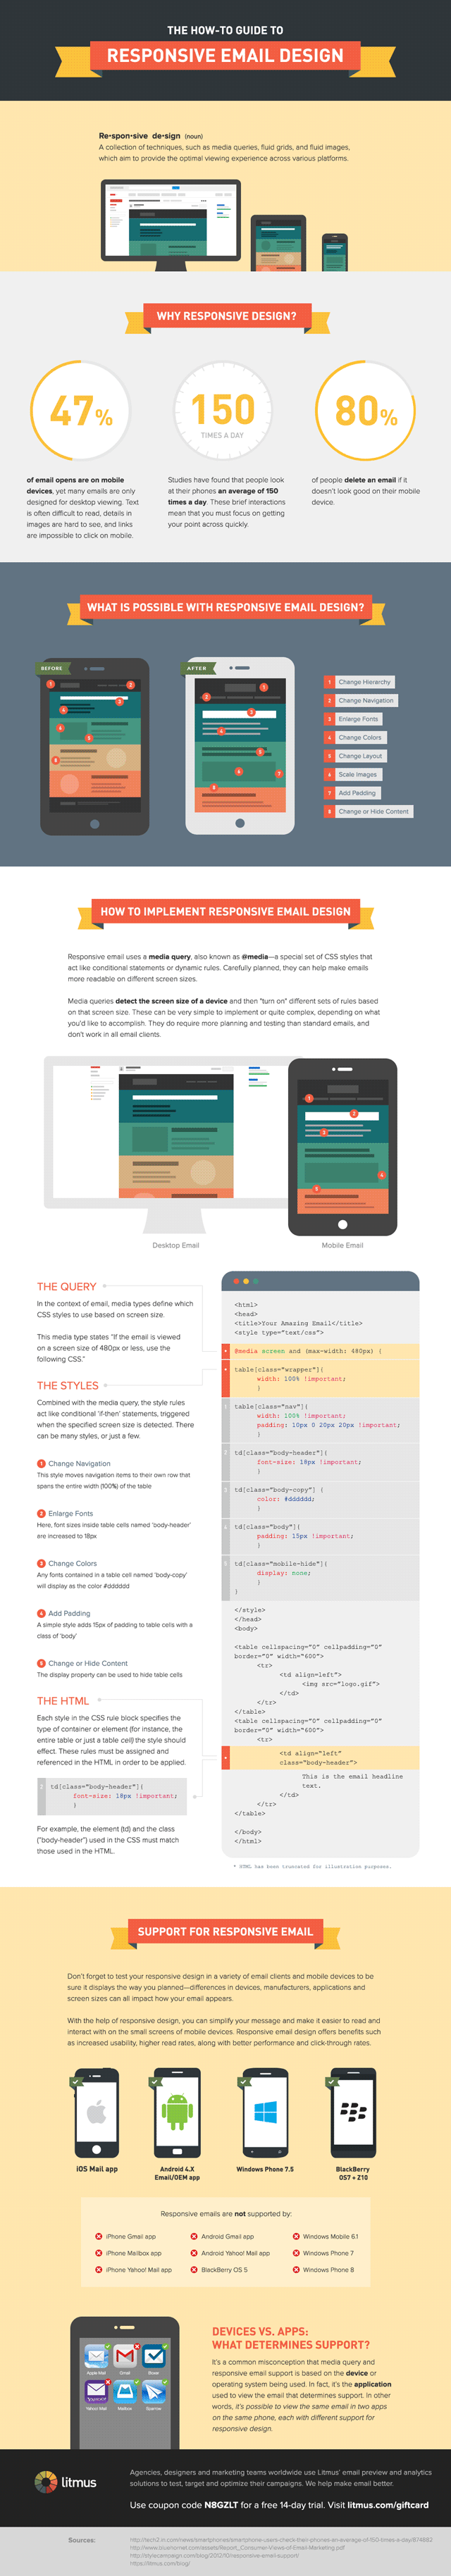 How to Design Responsive Emails